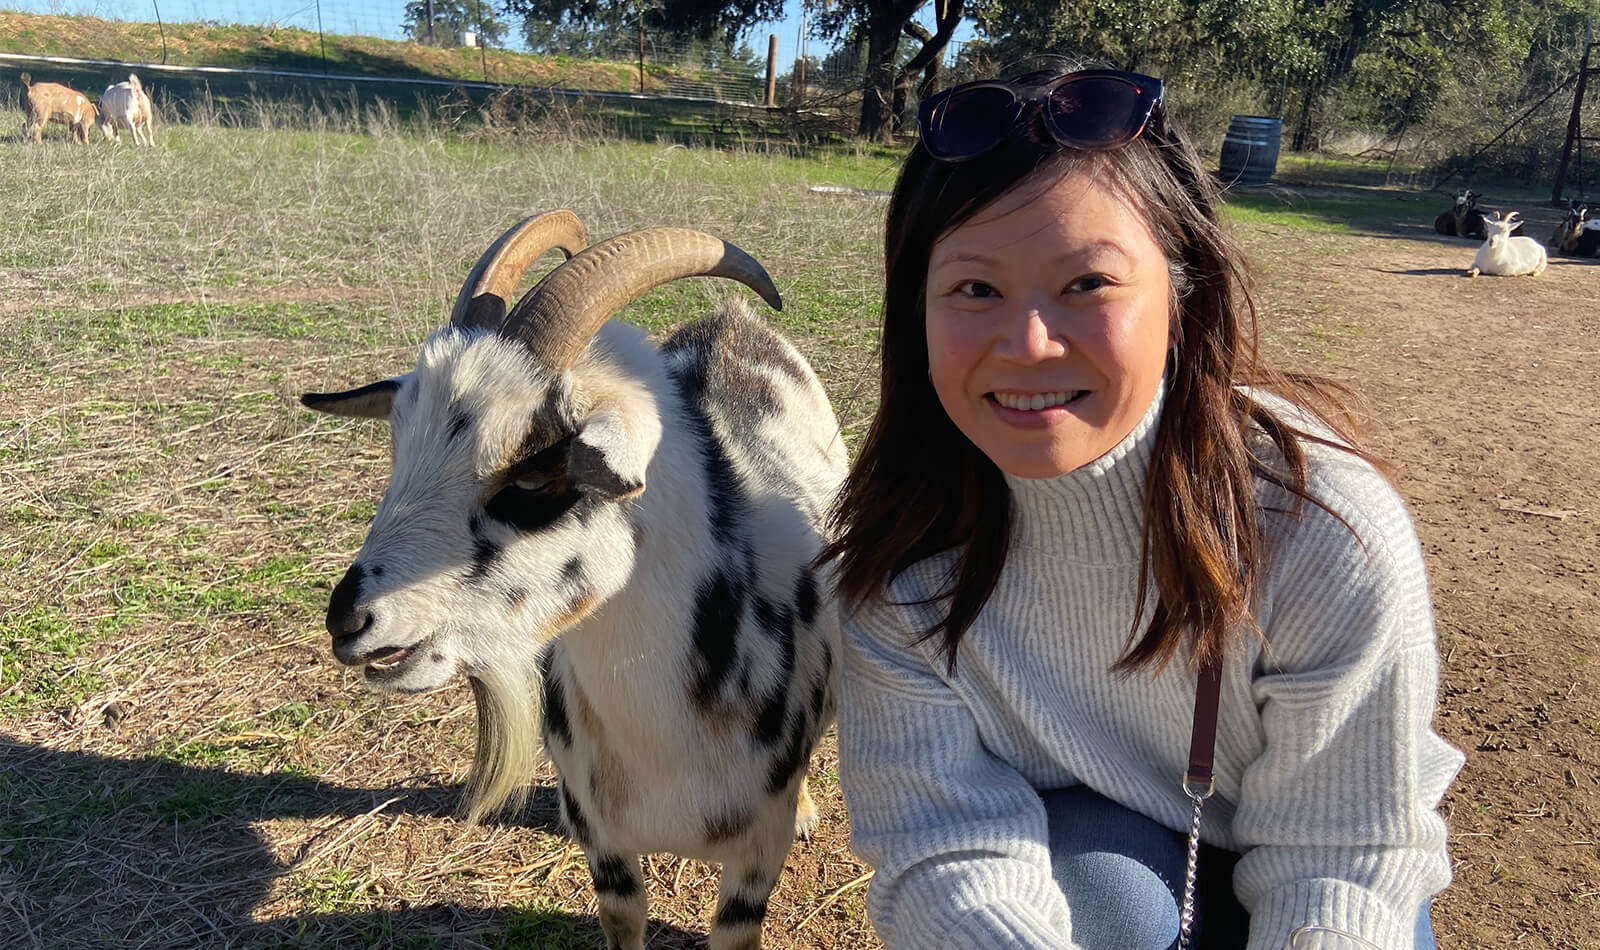 While at a Texas hill country farm, Shirley managed to snap a pic of her and one of the goats. 